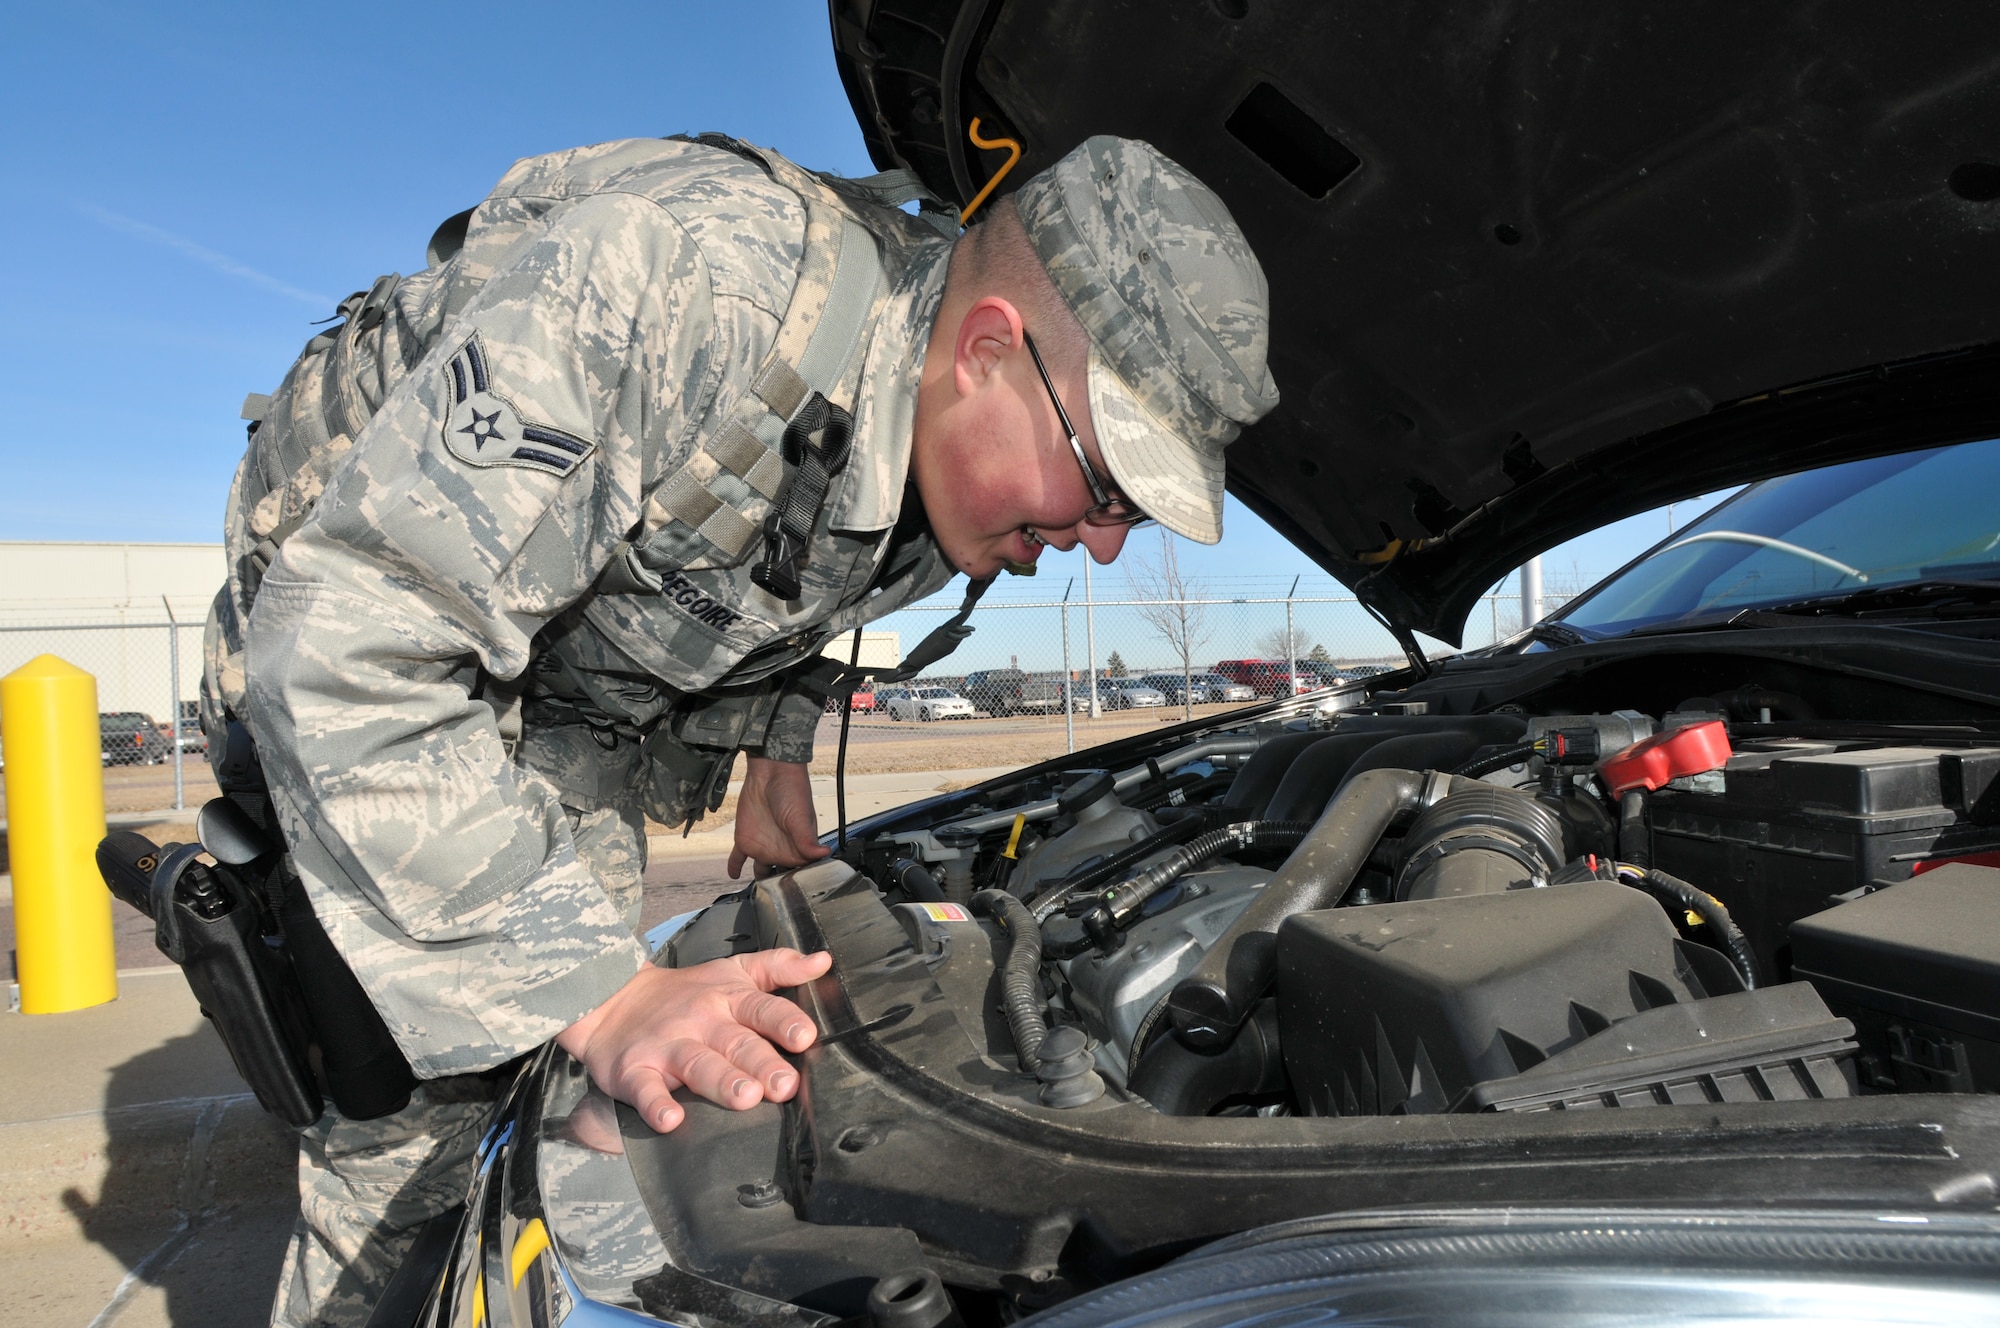 Sioux Falls, S.D. –Airman 1st Class Tyson Gregoire, 114th Security Forces Squadron, searches the engine compartment of a car while conducting a random vehicle search at the main gate at Joe Foss Field, Jan. 7.  Security personnel have been enjoying the unseasonable warm weather in South Dakota this winter. (National Guard photo by Tech. Sgt. Quinton Young)(Released)